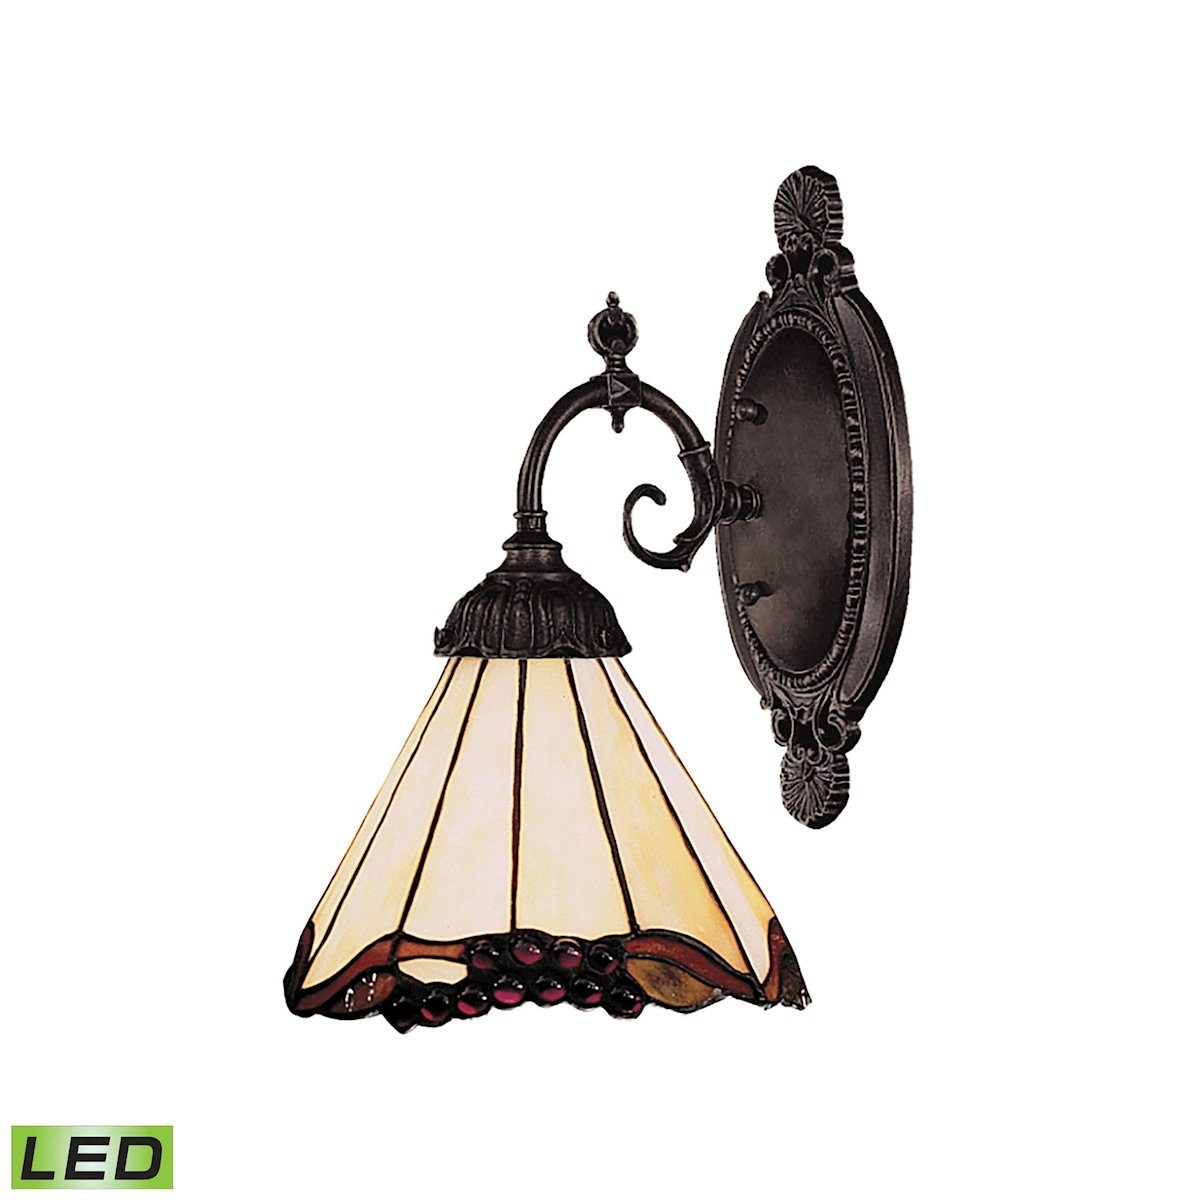 Mix-N-Match 1-Light Sconce in Tiffany Bronze - LED Offering Up To 800 Lumens (60 Watt Equivalent) Wi Wall Elk Lighting 